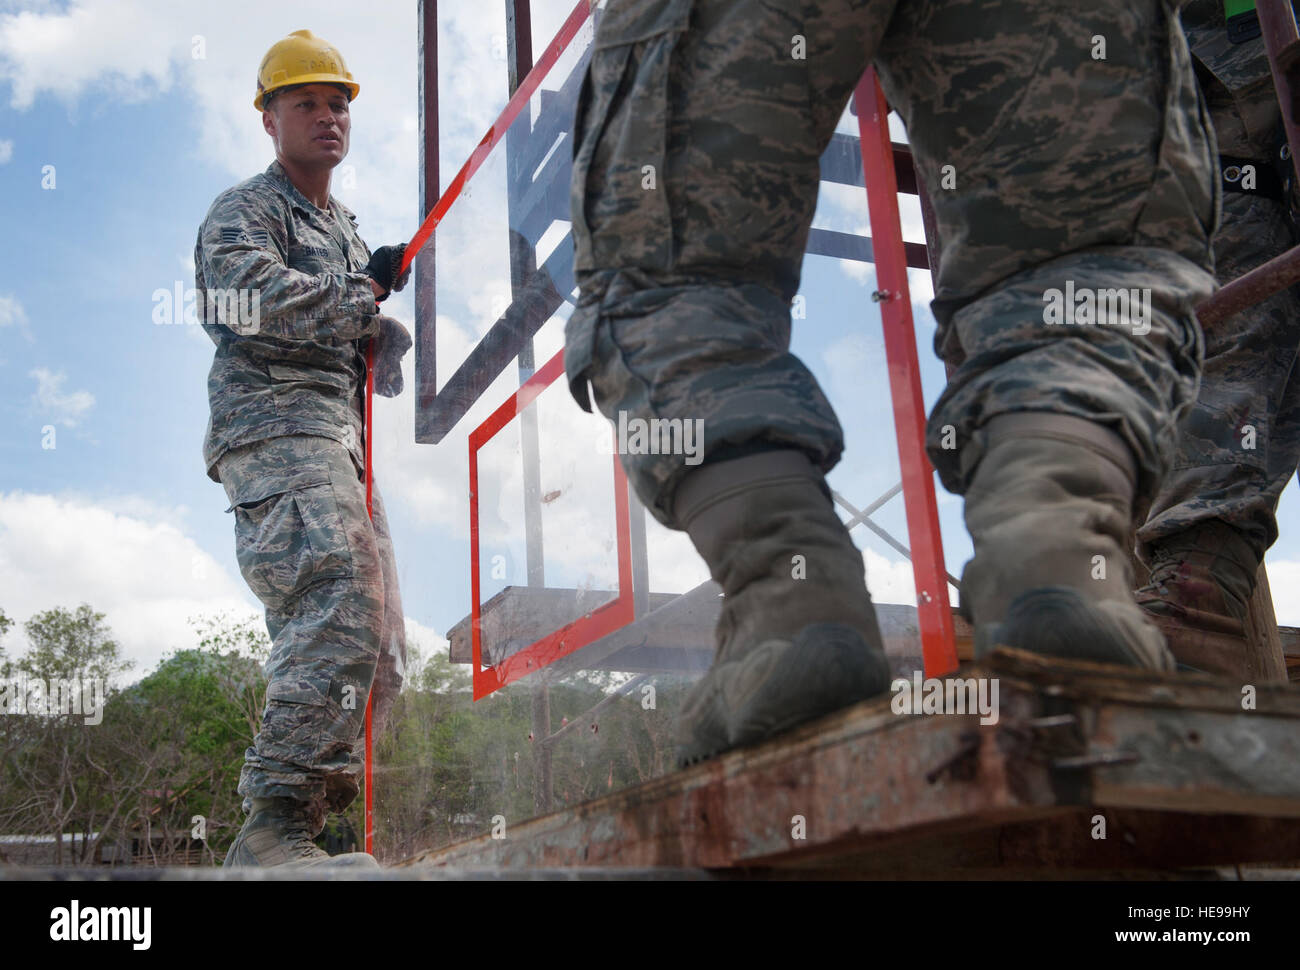 U.S. Air Force Staff Sgt. Corey Gates, 673rd Civil Engineer Group, a heating, ventilation, air conditioning craftsman, helps raise a backboard during construction a multipurpose basketball court during exercise Balikatan 2015, in San Rafael on the island of Palawan, Philippines, April 25. The construction of the basketball court was a part of an discretionary project that included excess materials and donations. This year marks the 31st iteration of the exercise, which is an annual Philippine-U.S. bilateral military training exercise and humanitarian civic assistance engagement.  Staff Sgt. Ch Stock Photo